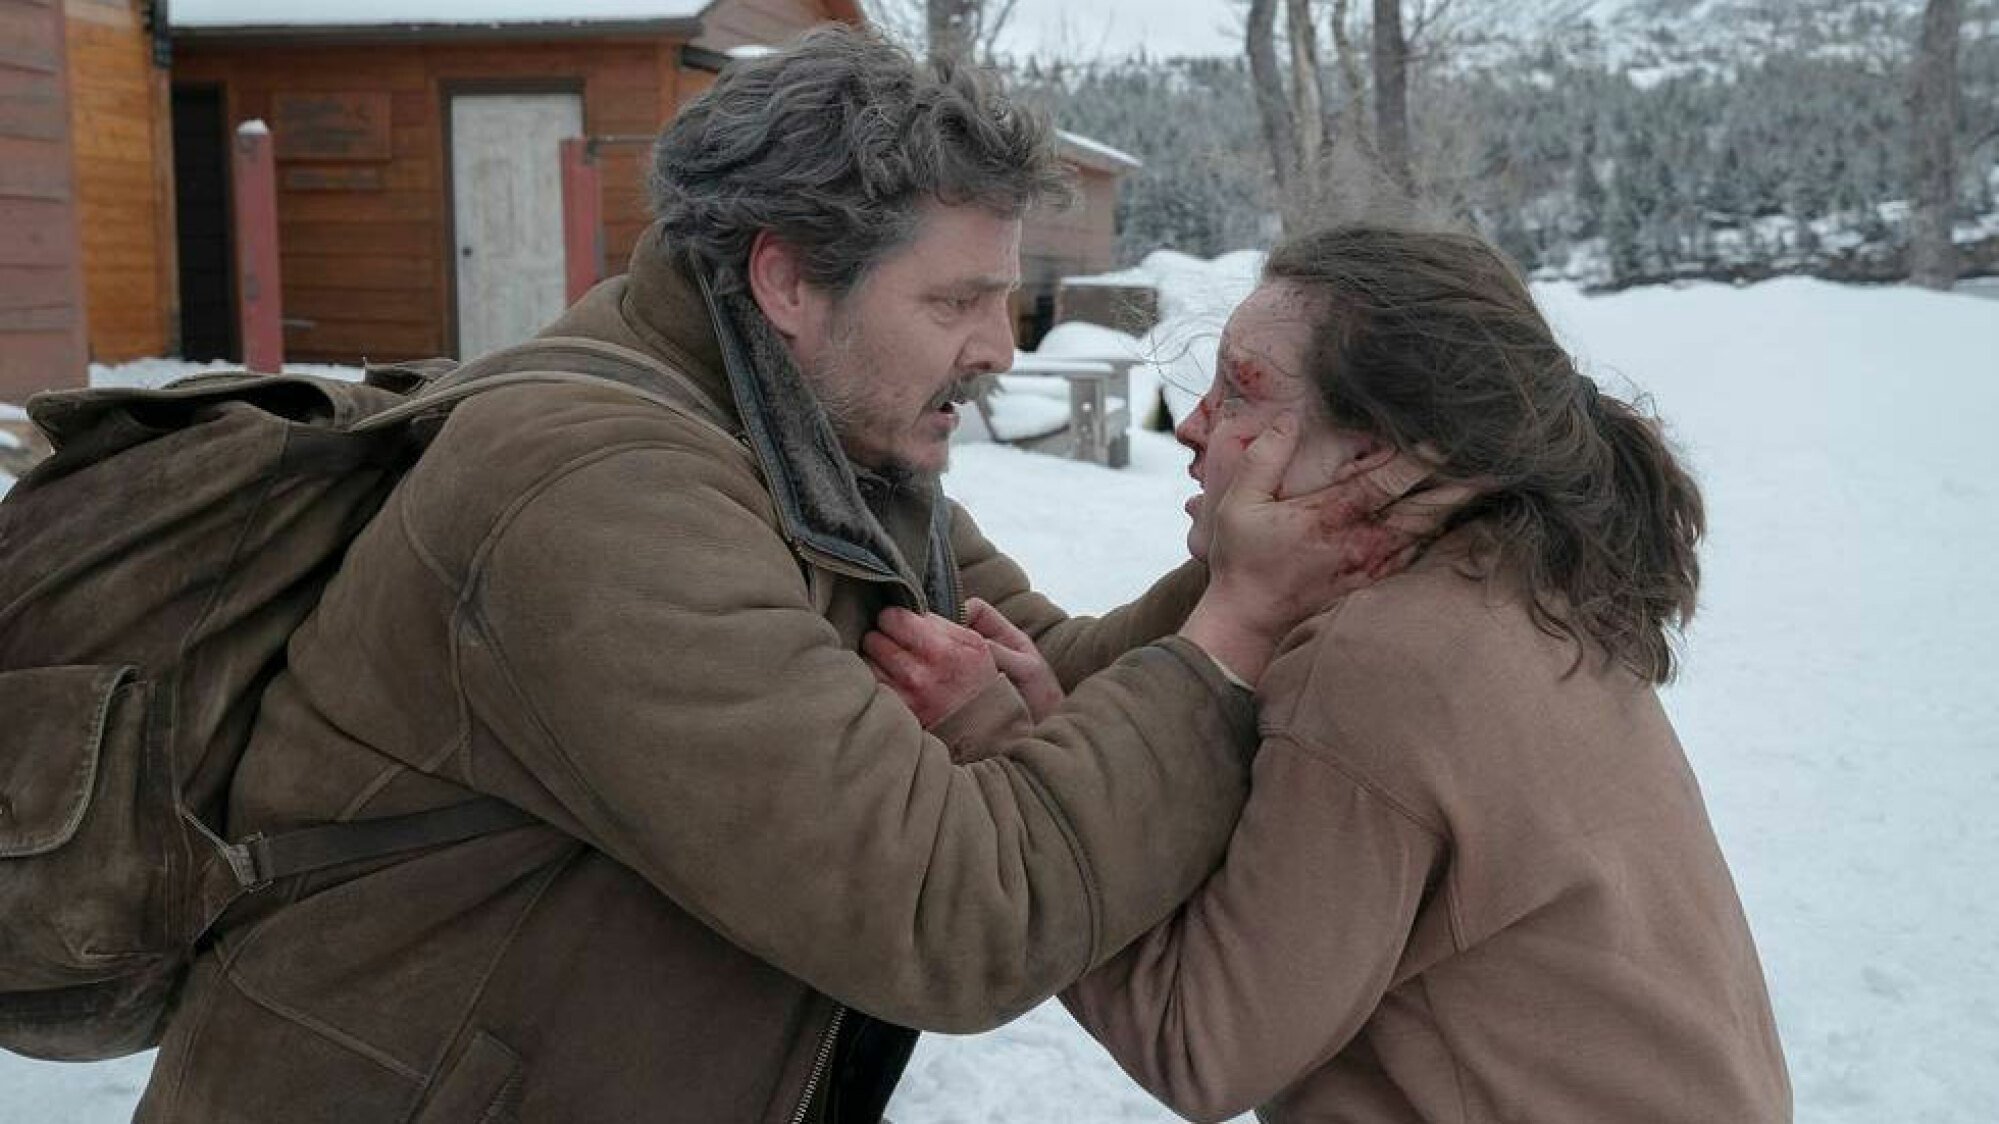 A man outside in the snow cradles the face of a young injured girl.